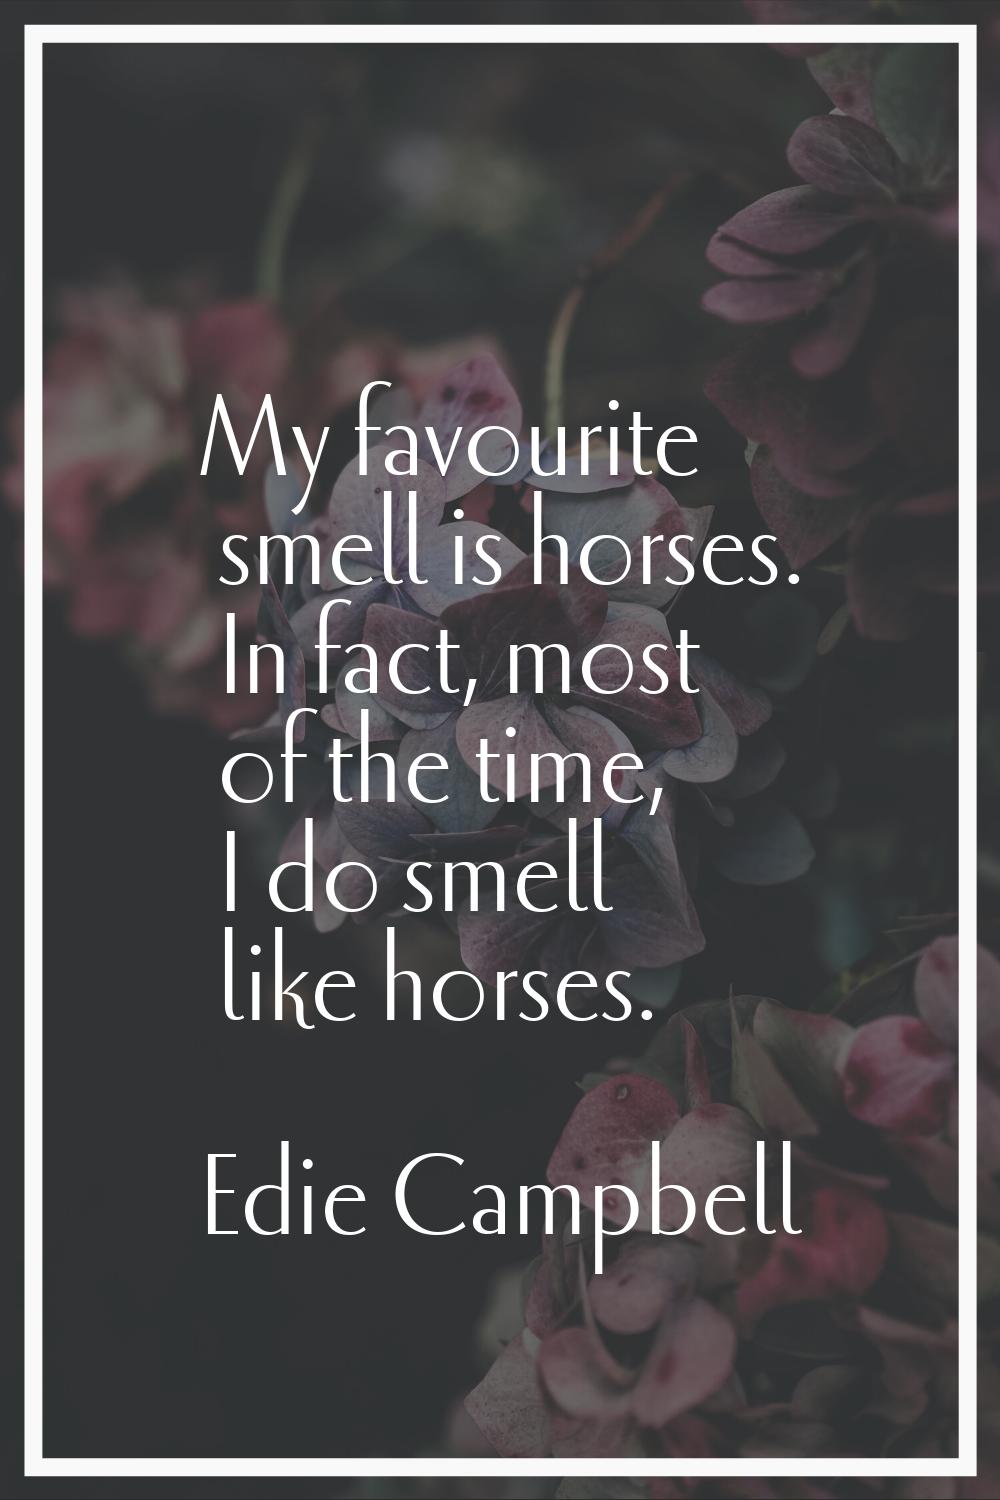 My favourite smell is horses. In fact, most of the time, I do smell like horses.